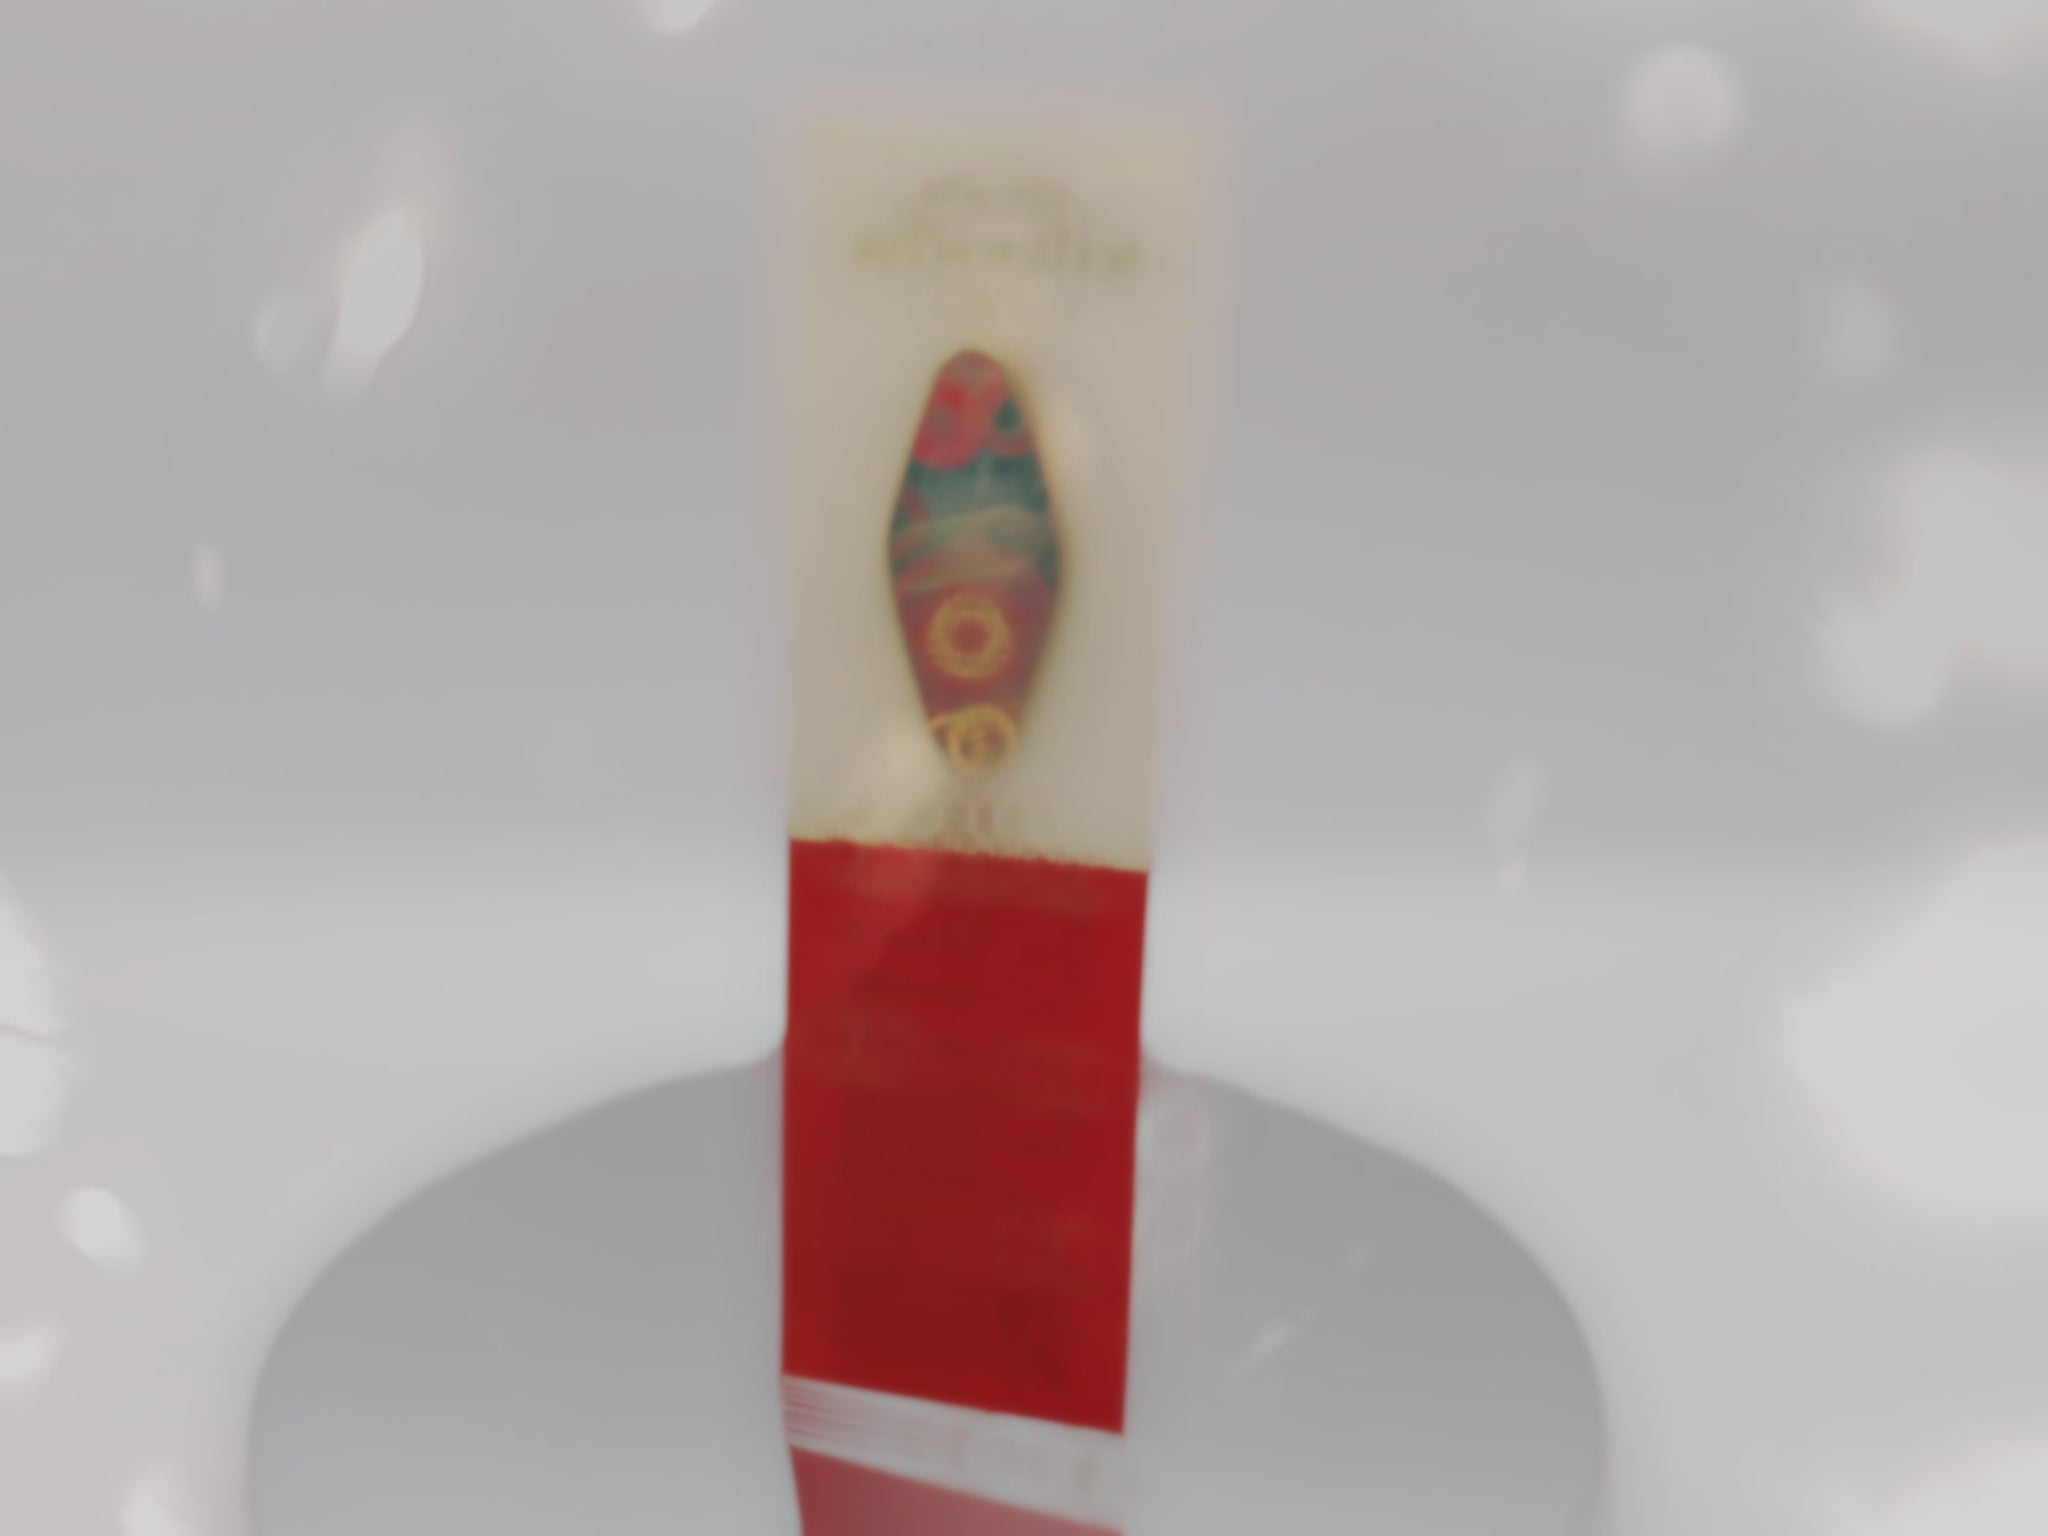 Video of front and back of the Gold Enamel Talisman Pin with red and blue design and the words RPG Talisman sits on a long white and red backing card with gold accents. The backing card has details the symbolism of the different design elements of the Talisman pin.